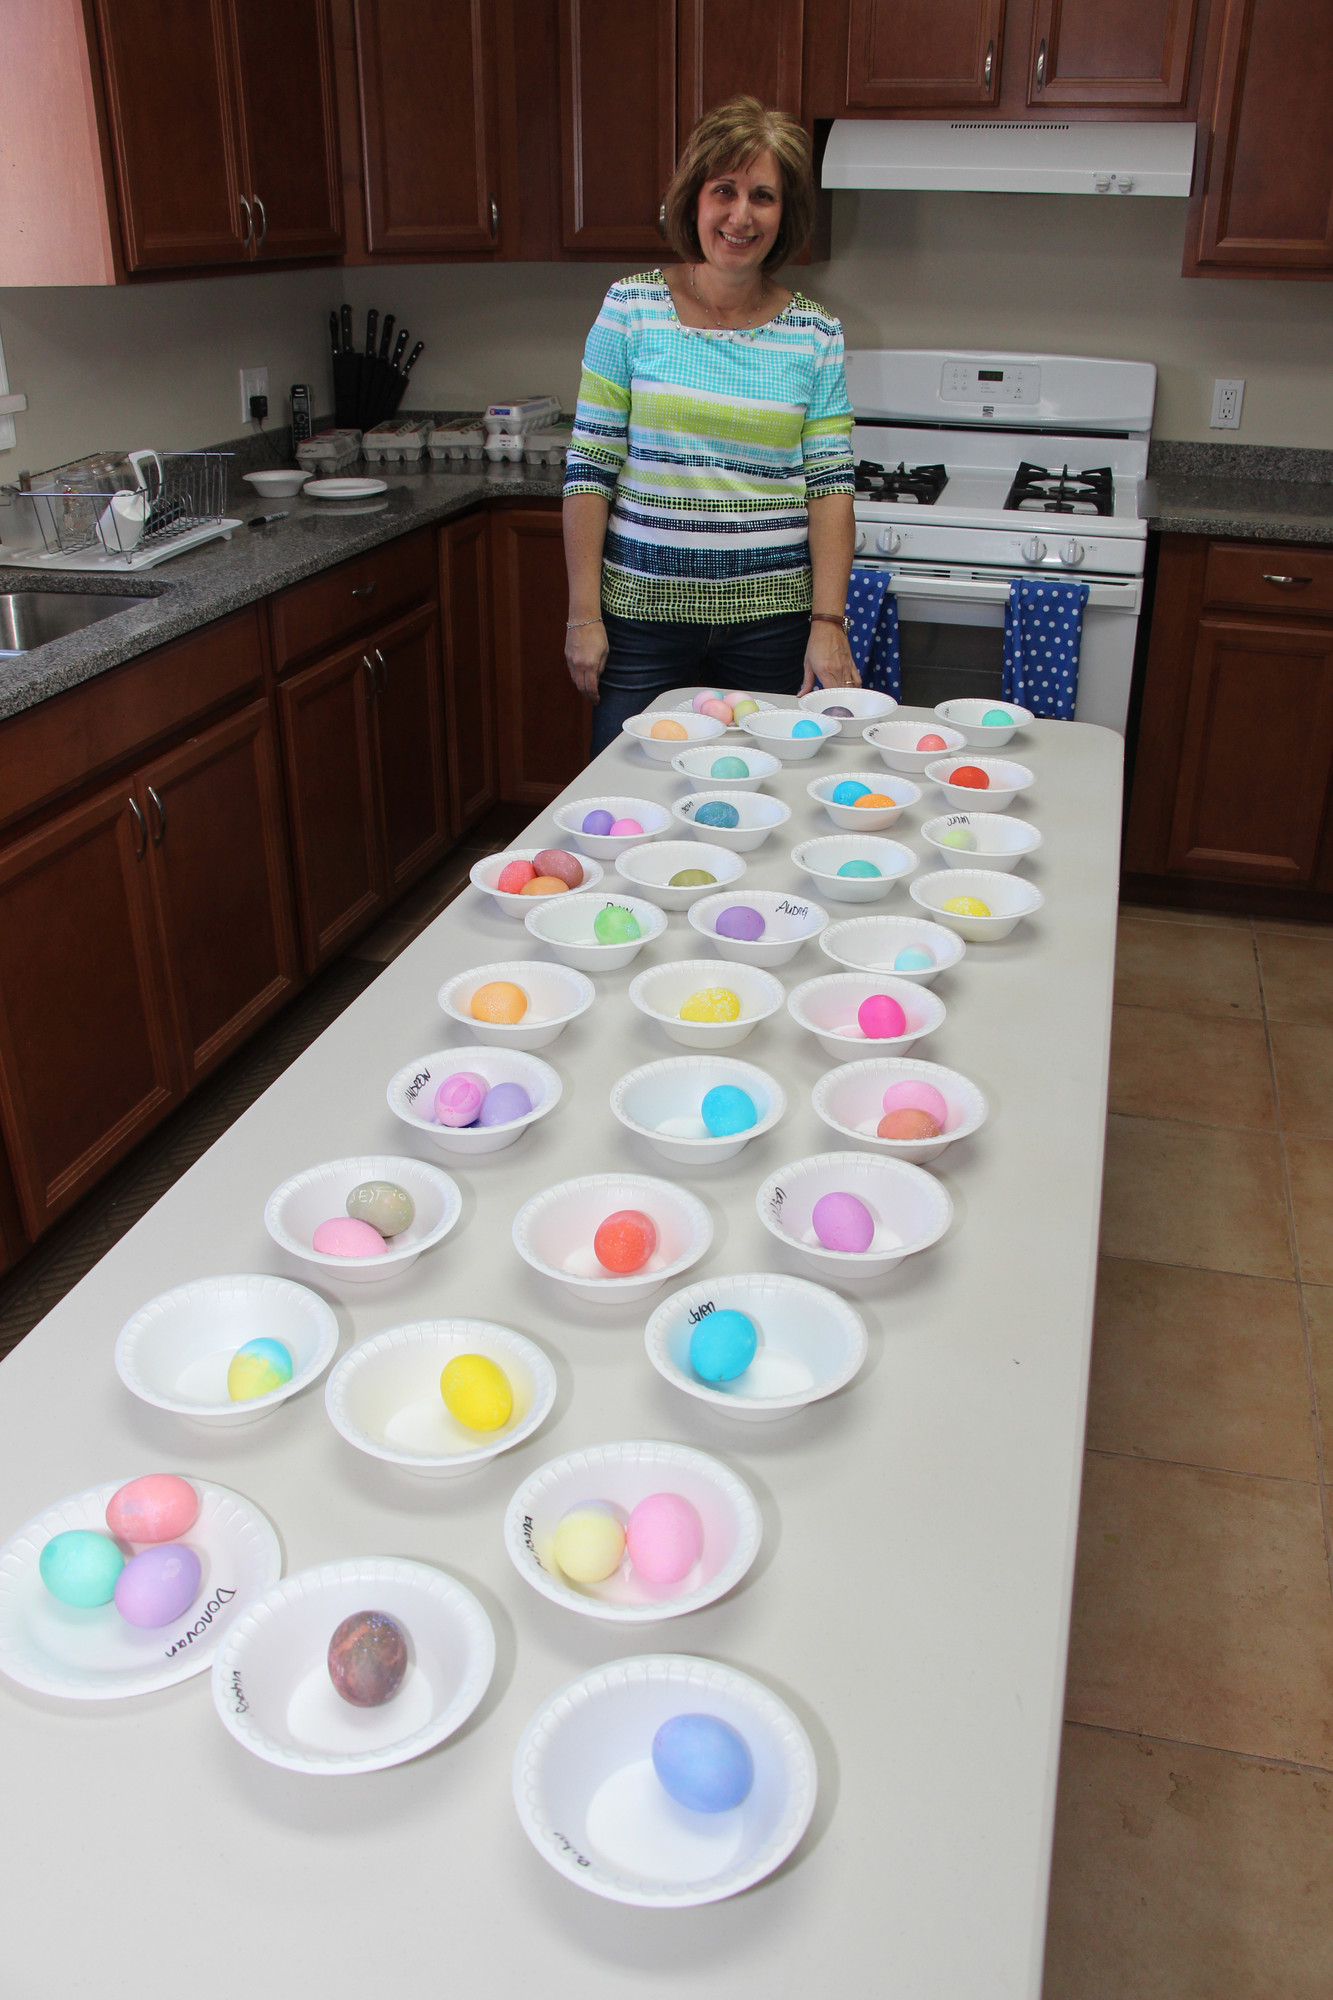 Jean Sharf, who helped coordinate many of the activities, looked over the colorful eggs the children made.